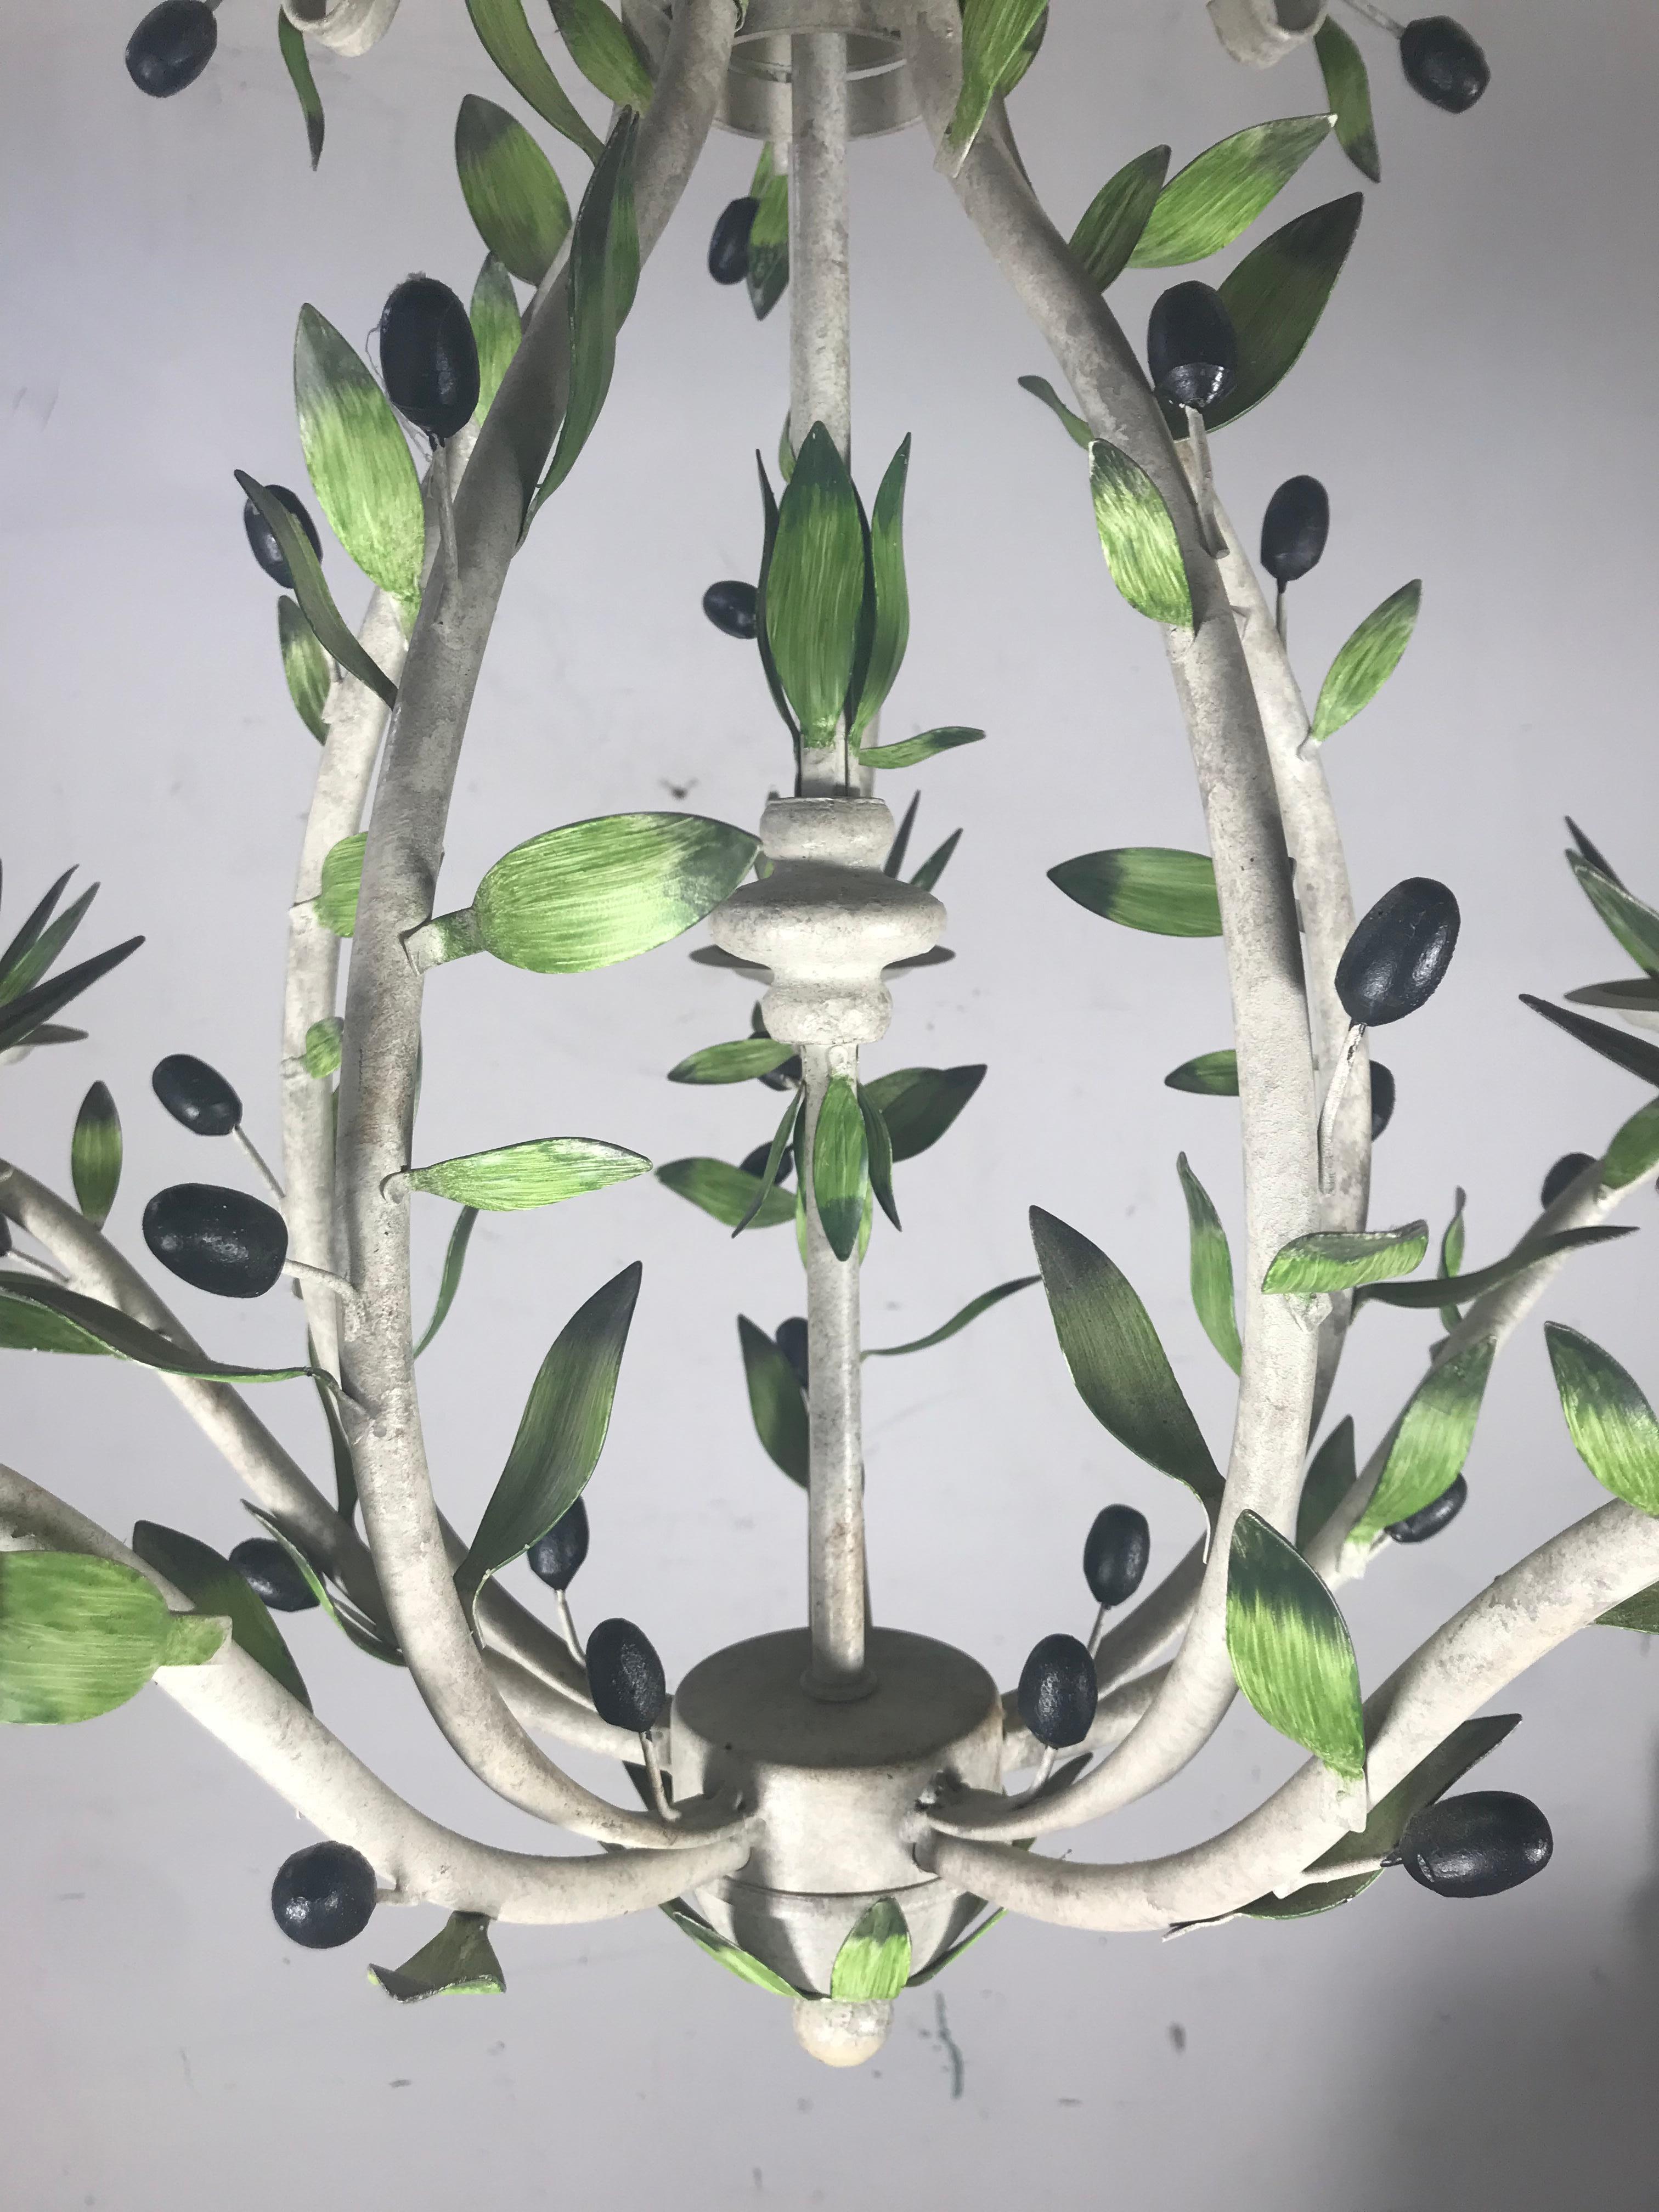 Mid-Century Modern chandelier, Italian Hollywood Regency. Item features scrolling white painted metal frame, green leaf accents, olives, leafy bobeche, five scrolling arms, and five lights, circa mid-20th century, Italy.